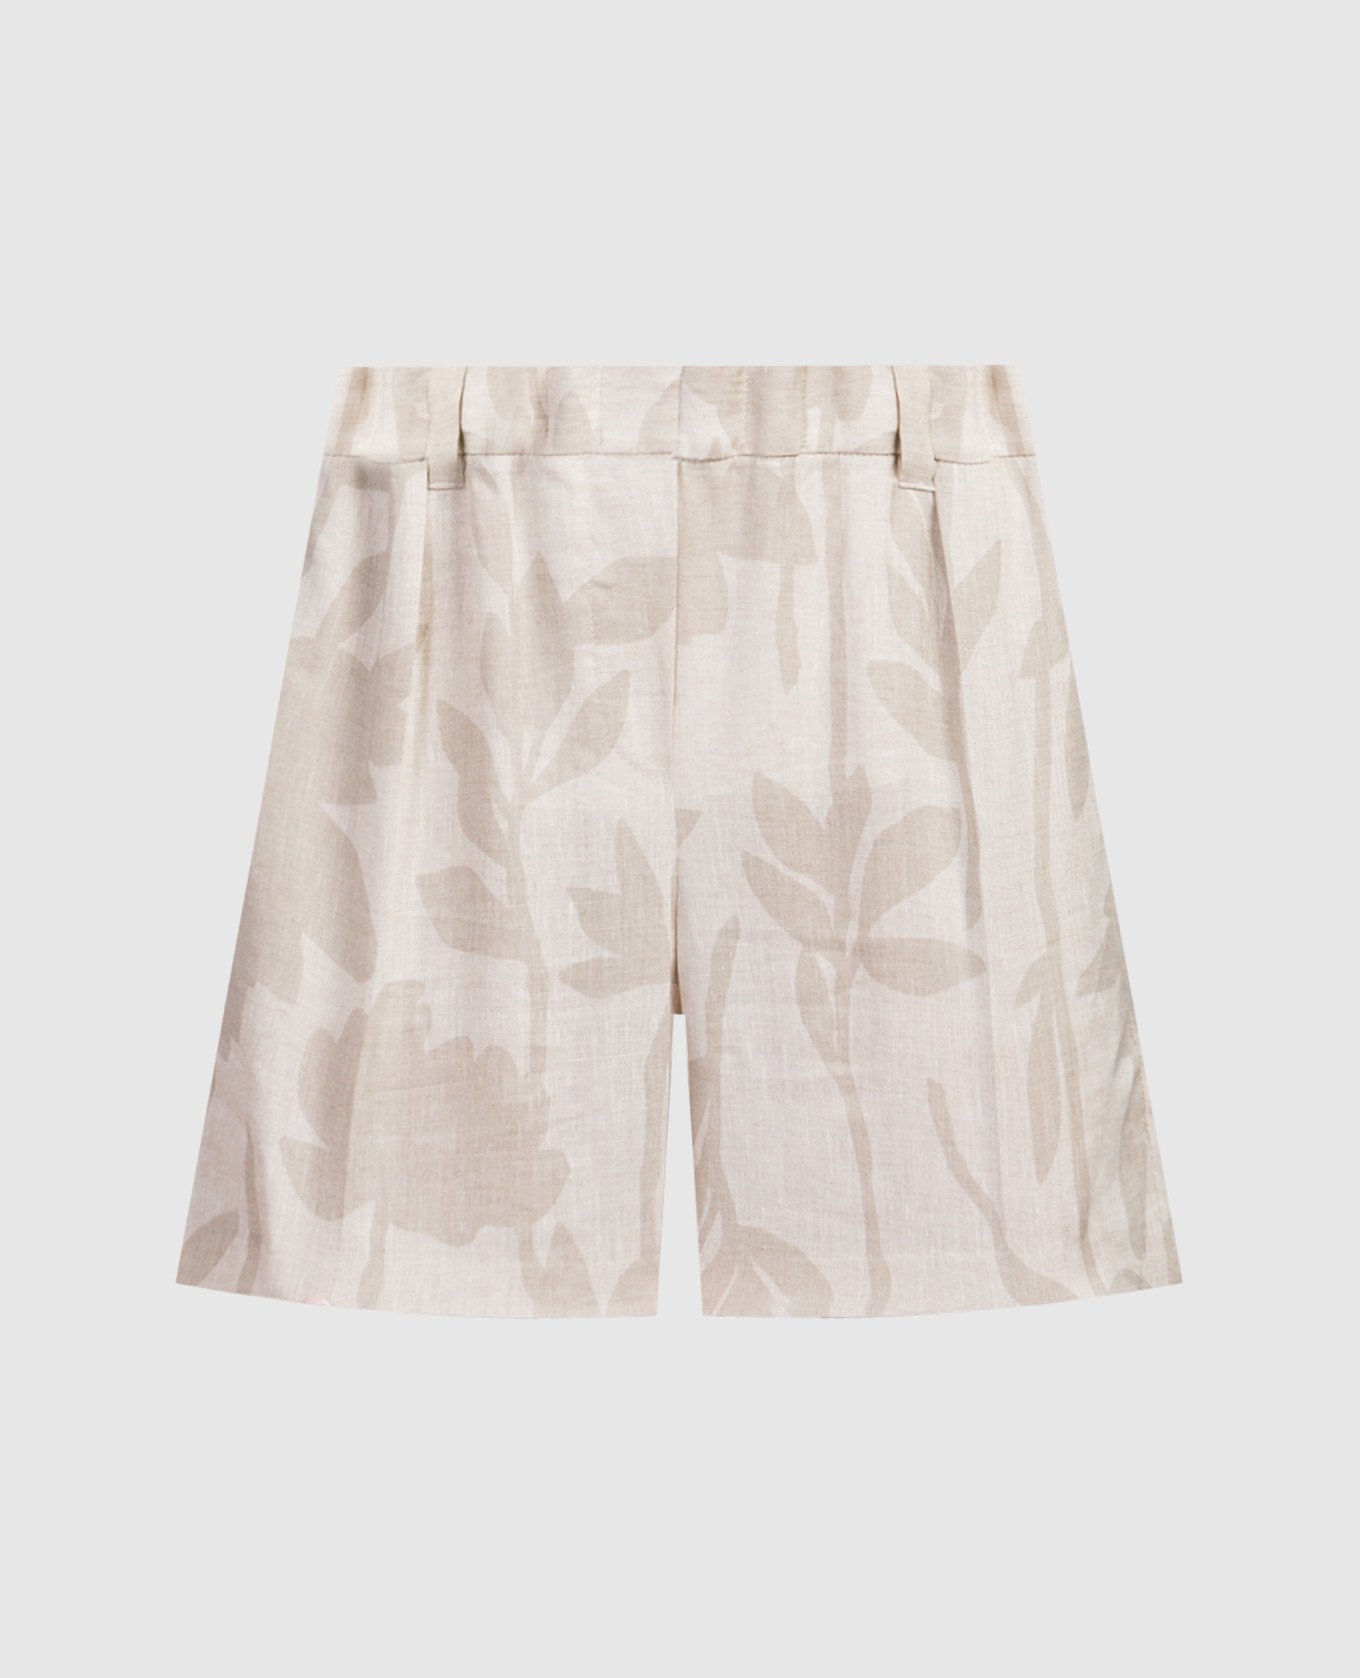 Beige linen shorts in a plant print